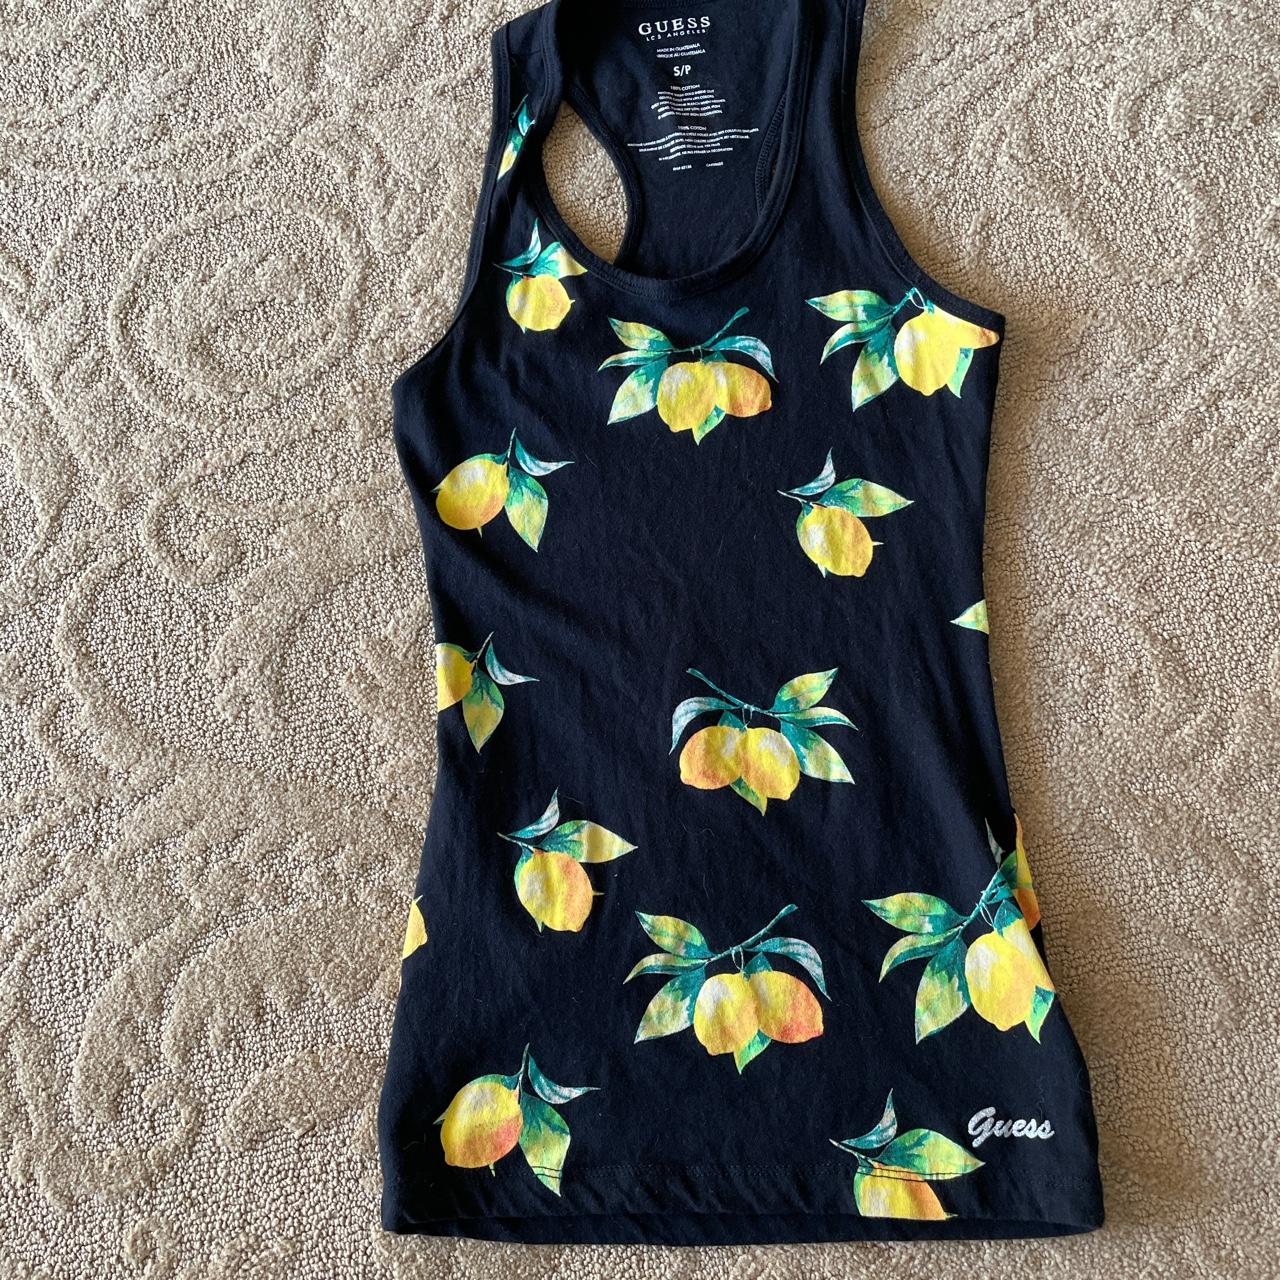 Guess Women's Black and Yellow Vests-tanks-camis (3)